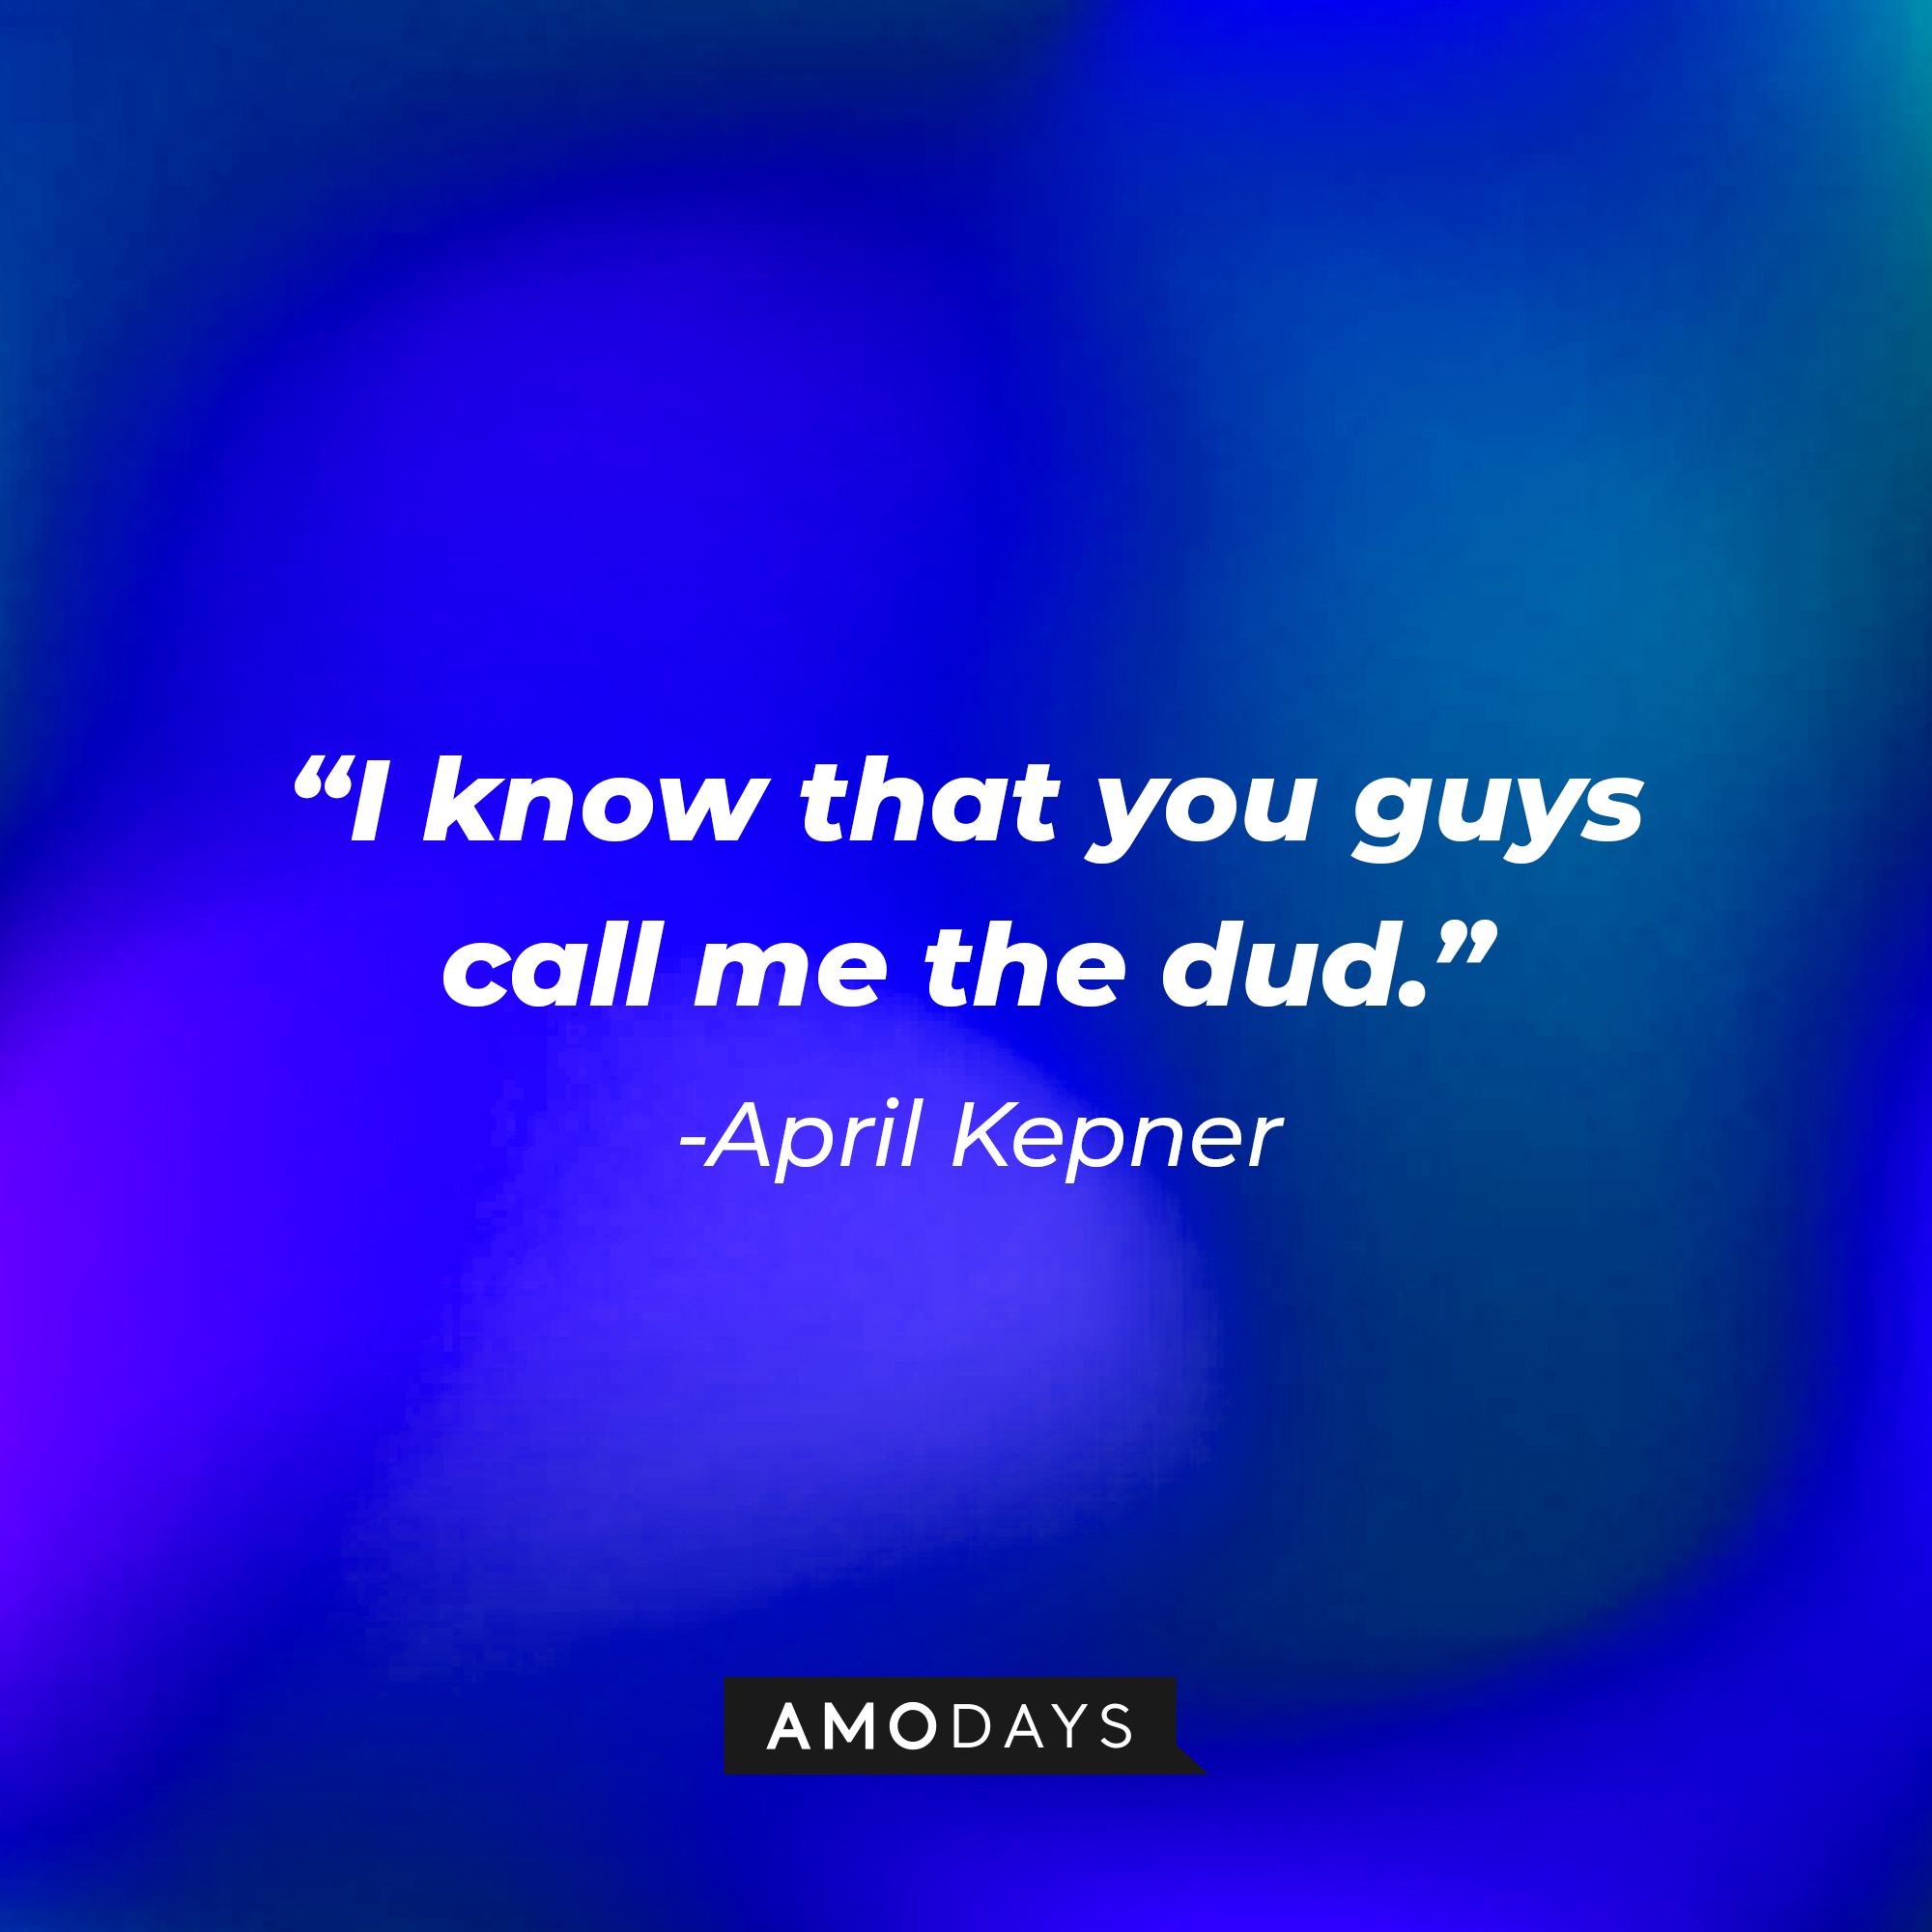 April Kepner's quote: "I know that you guys call me the dud." | Source: AmoDays